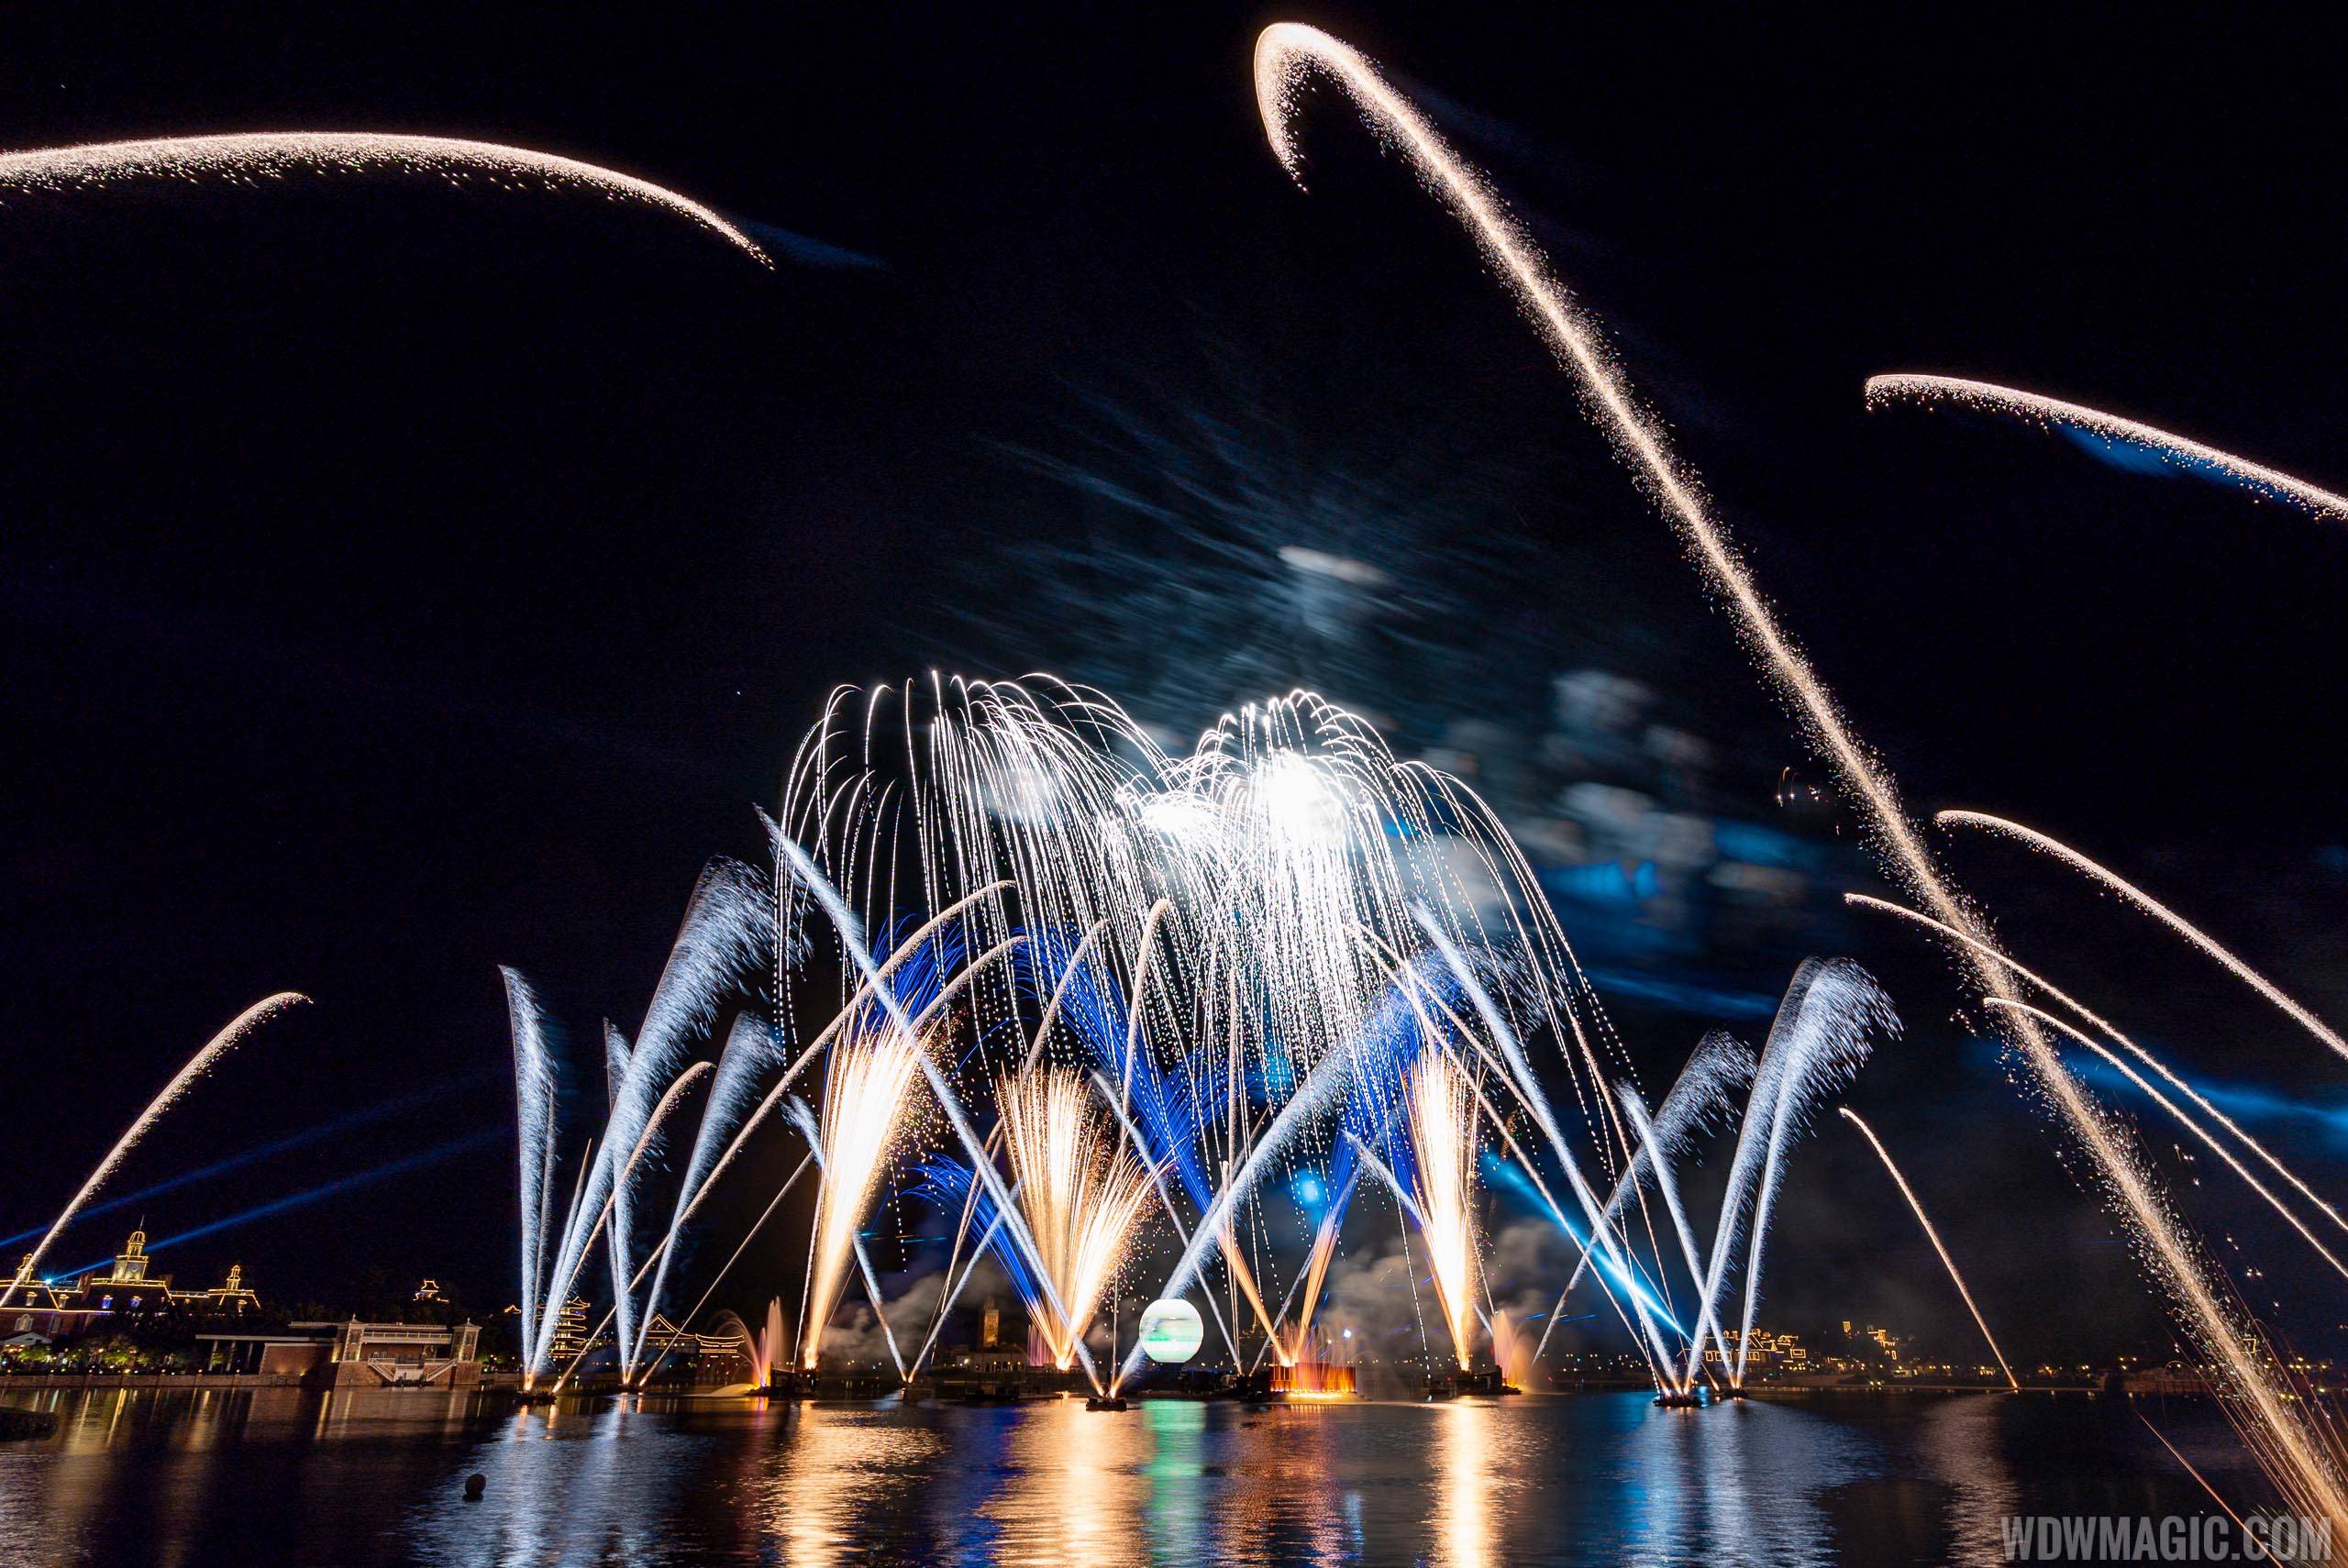 IllumiNations Reflections of Earth from Norway - September 2019